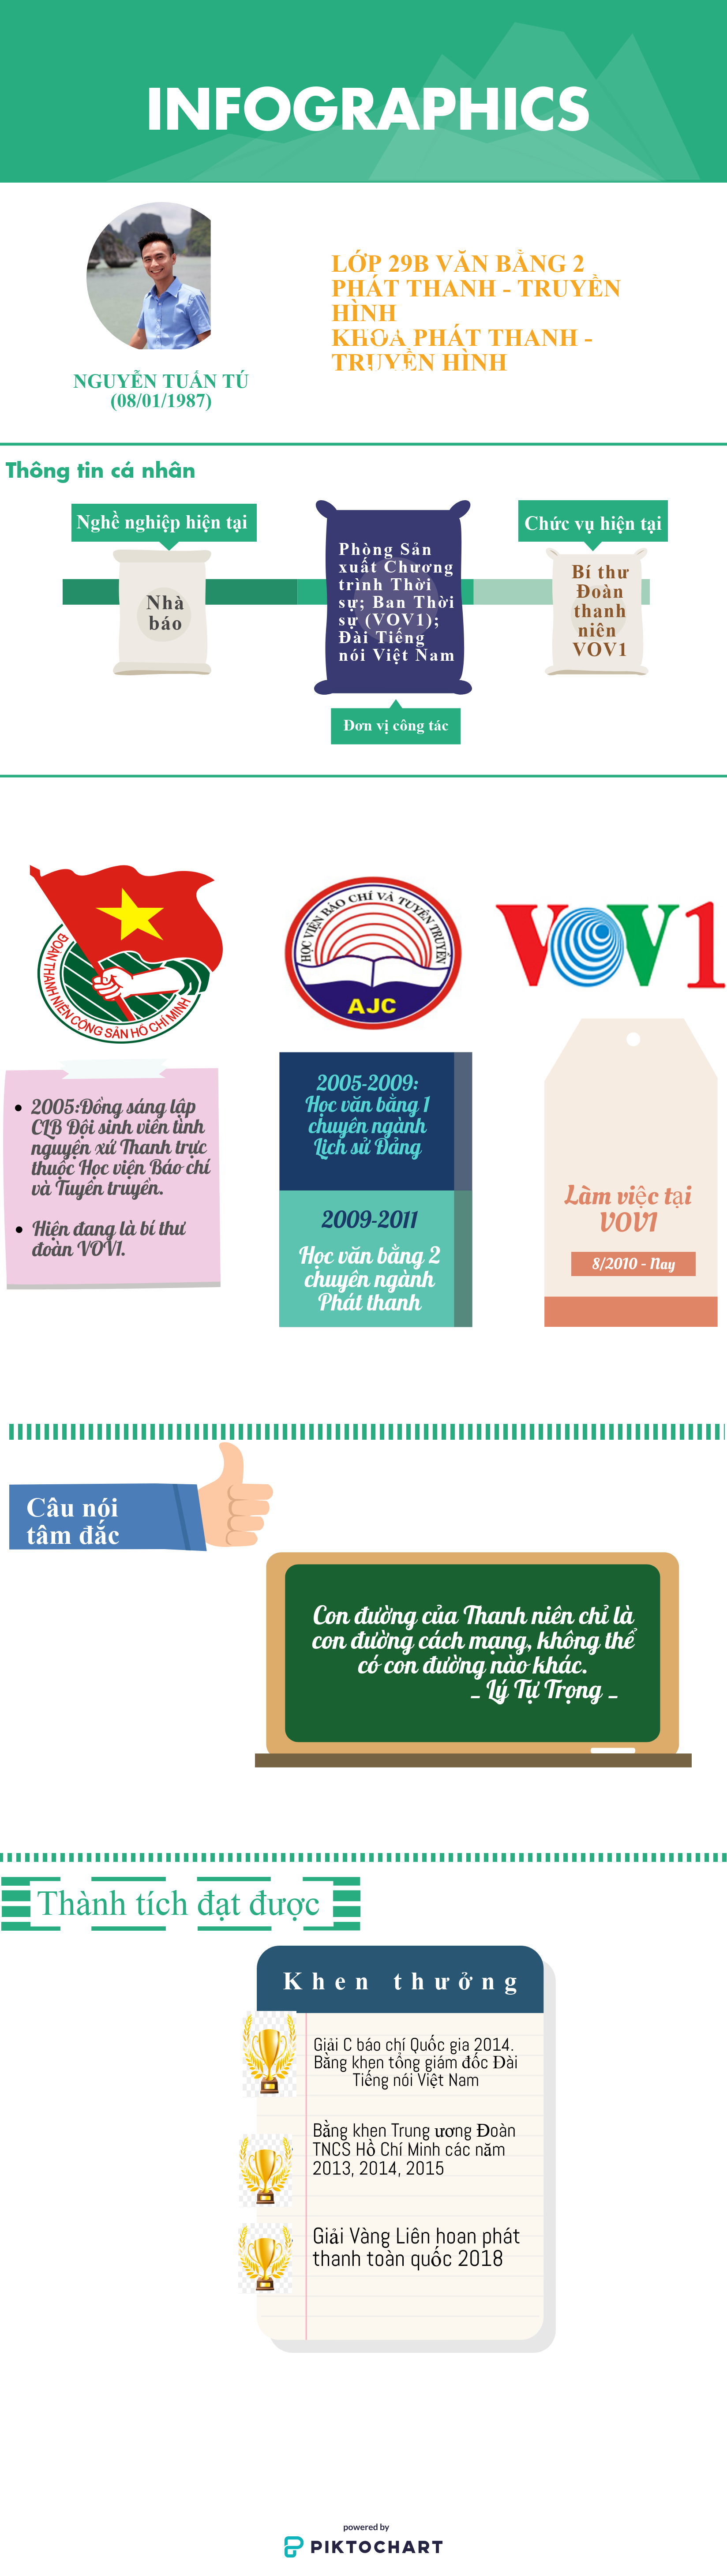 87a84fc14_infographic_2.png